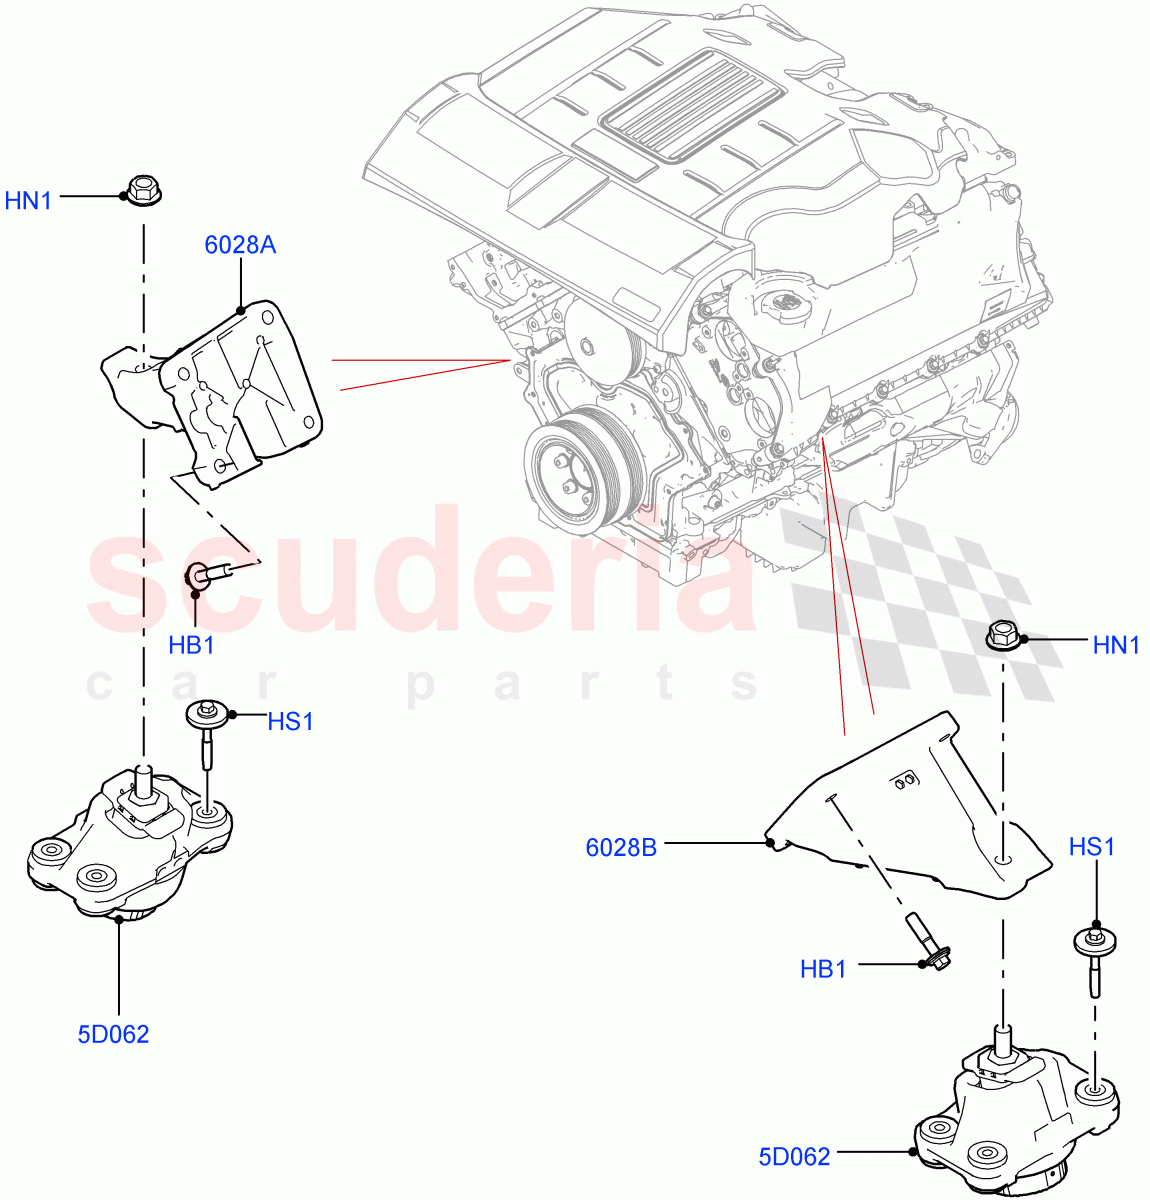 Engine Mounting(Solihull Plant Build)(3.0L DOHC GDI SC V6 PETROL)((V)FROMHA000001) of Land Rover Land Rover Discovery 5 (2017+) [3.0 I6 Turbo Diesel AJ20D6]